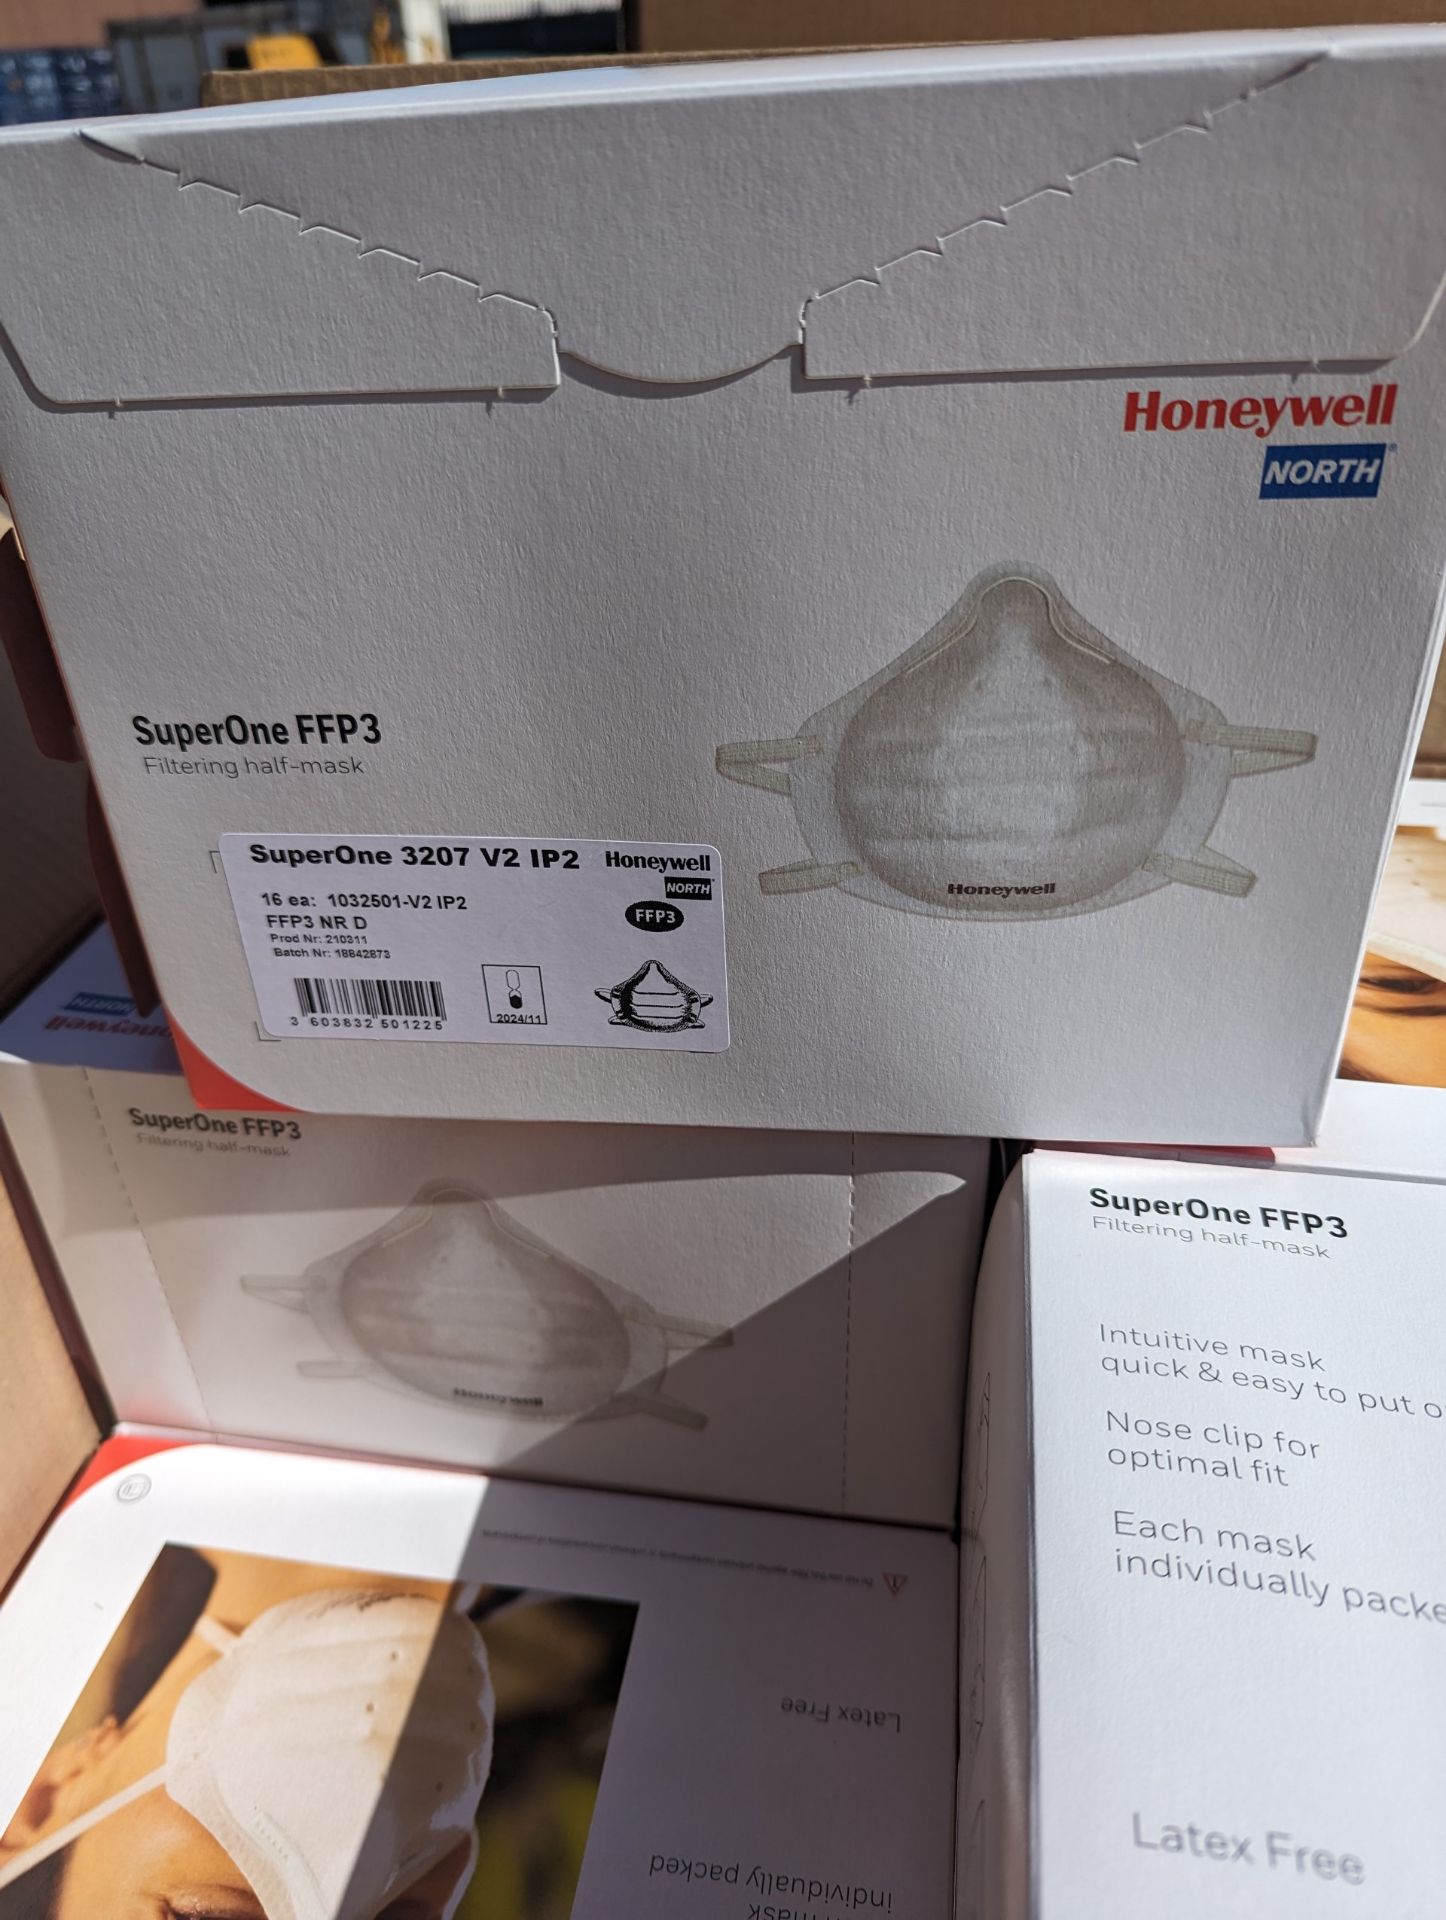 4x Boxes Honeywell SuperOne V2 ip2 FFP3 Half mask filters, 12packs of 16 units per box. - Image 4 of 4